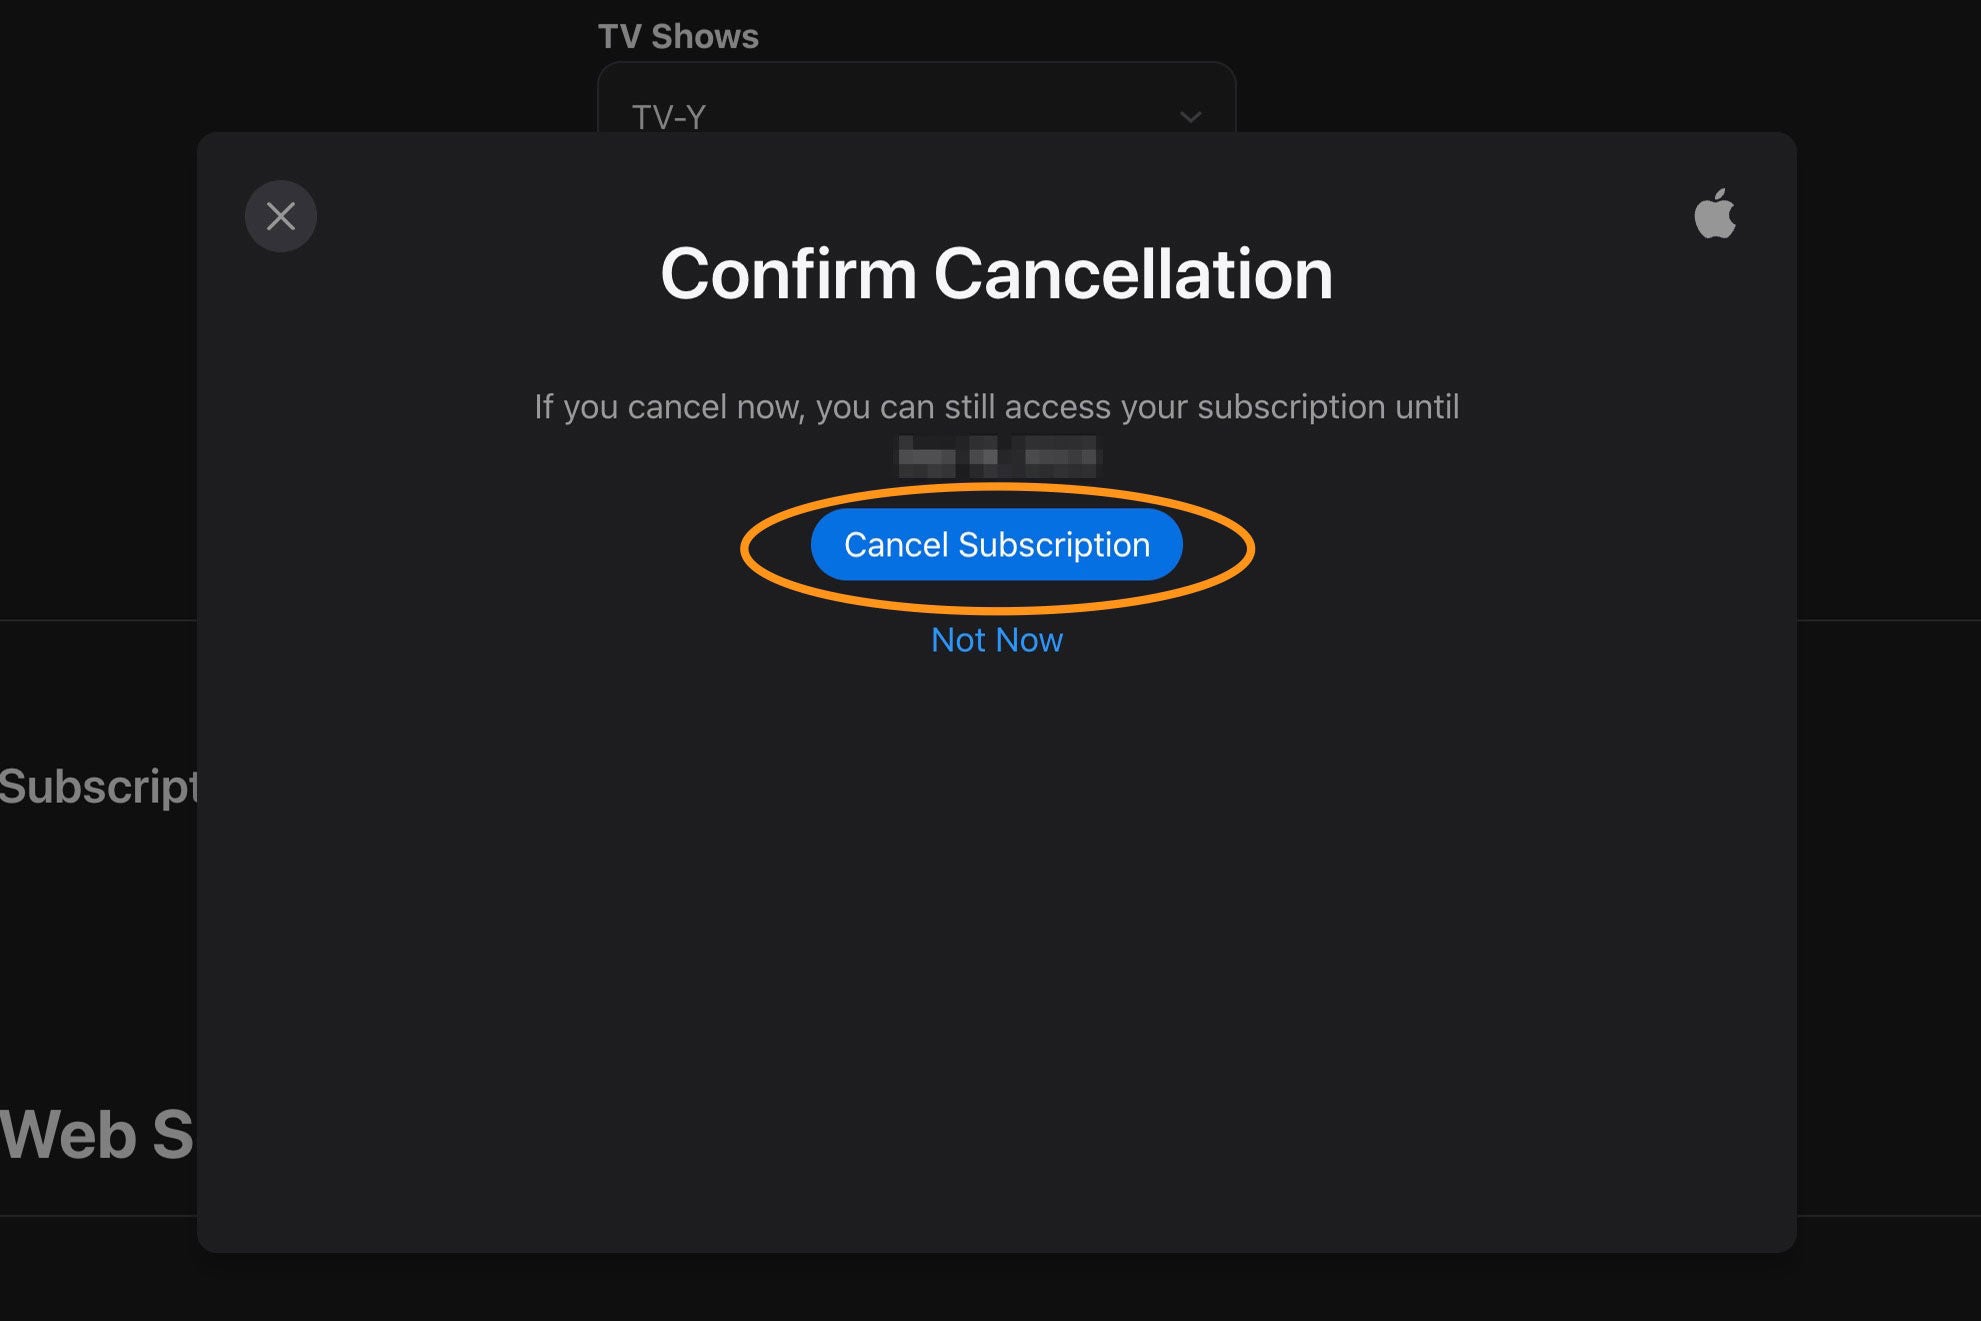 Apple TV internet browser cancel subscription confirmation page